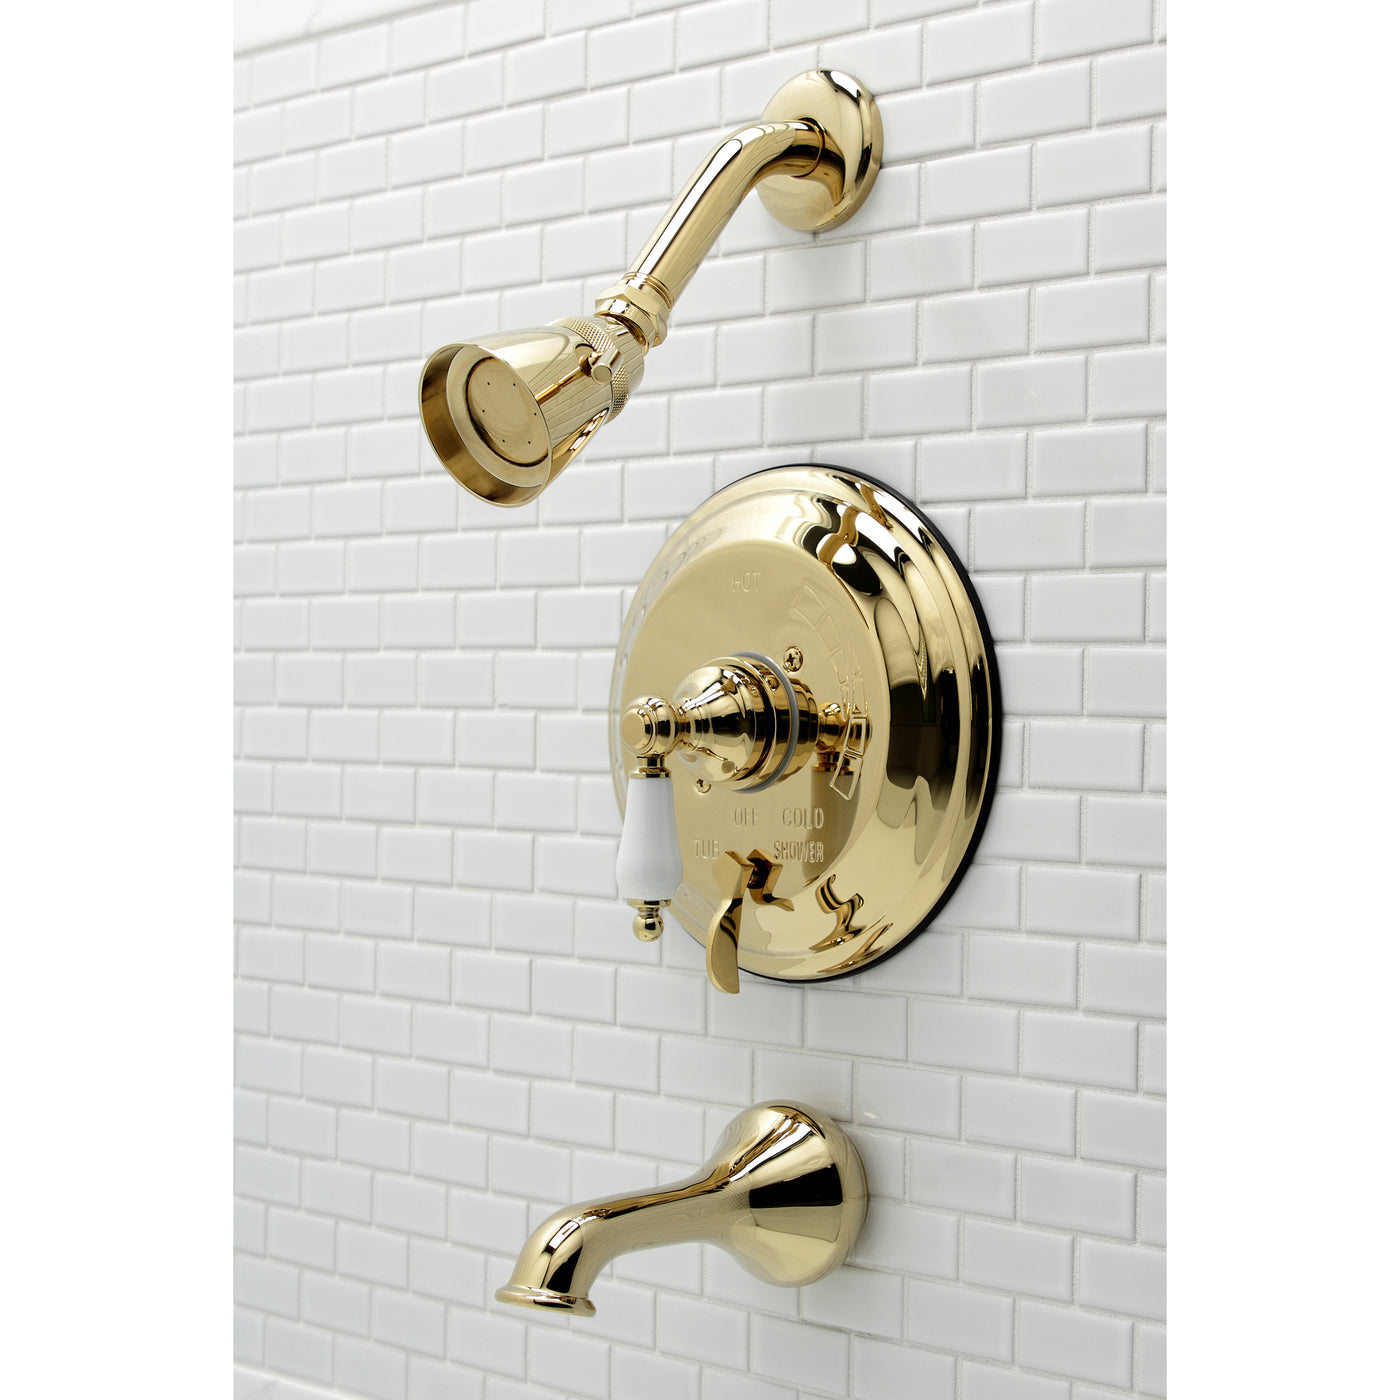 Elements of Design EB36320PL Tub and Shower Faucet, Polished Brass